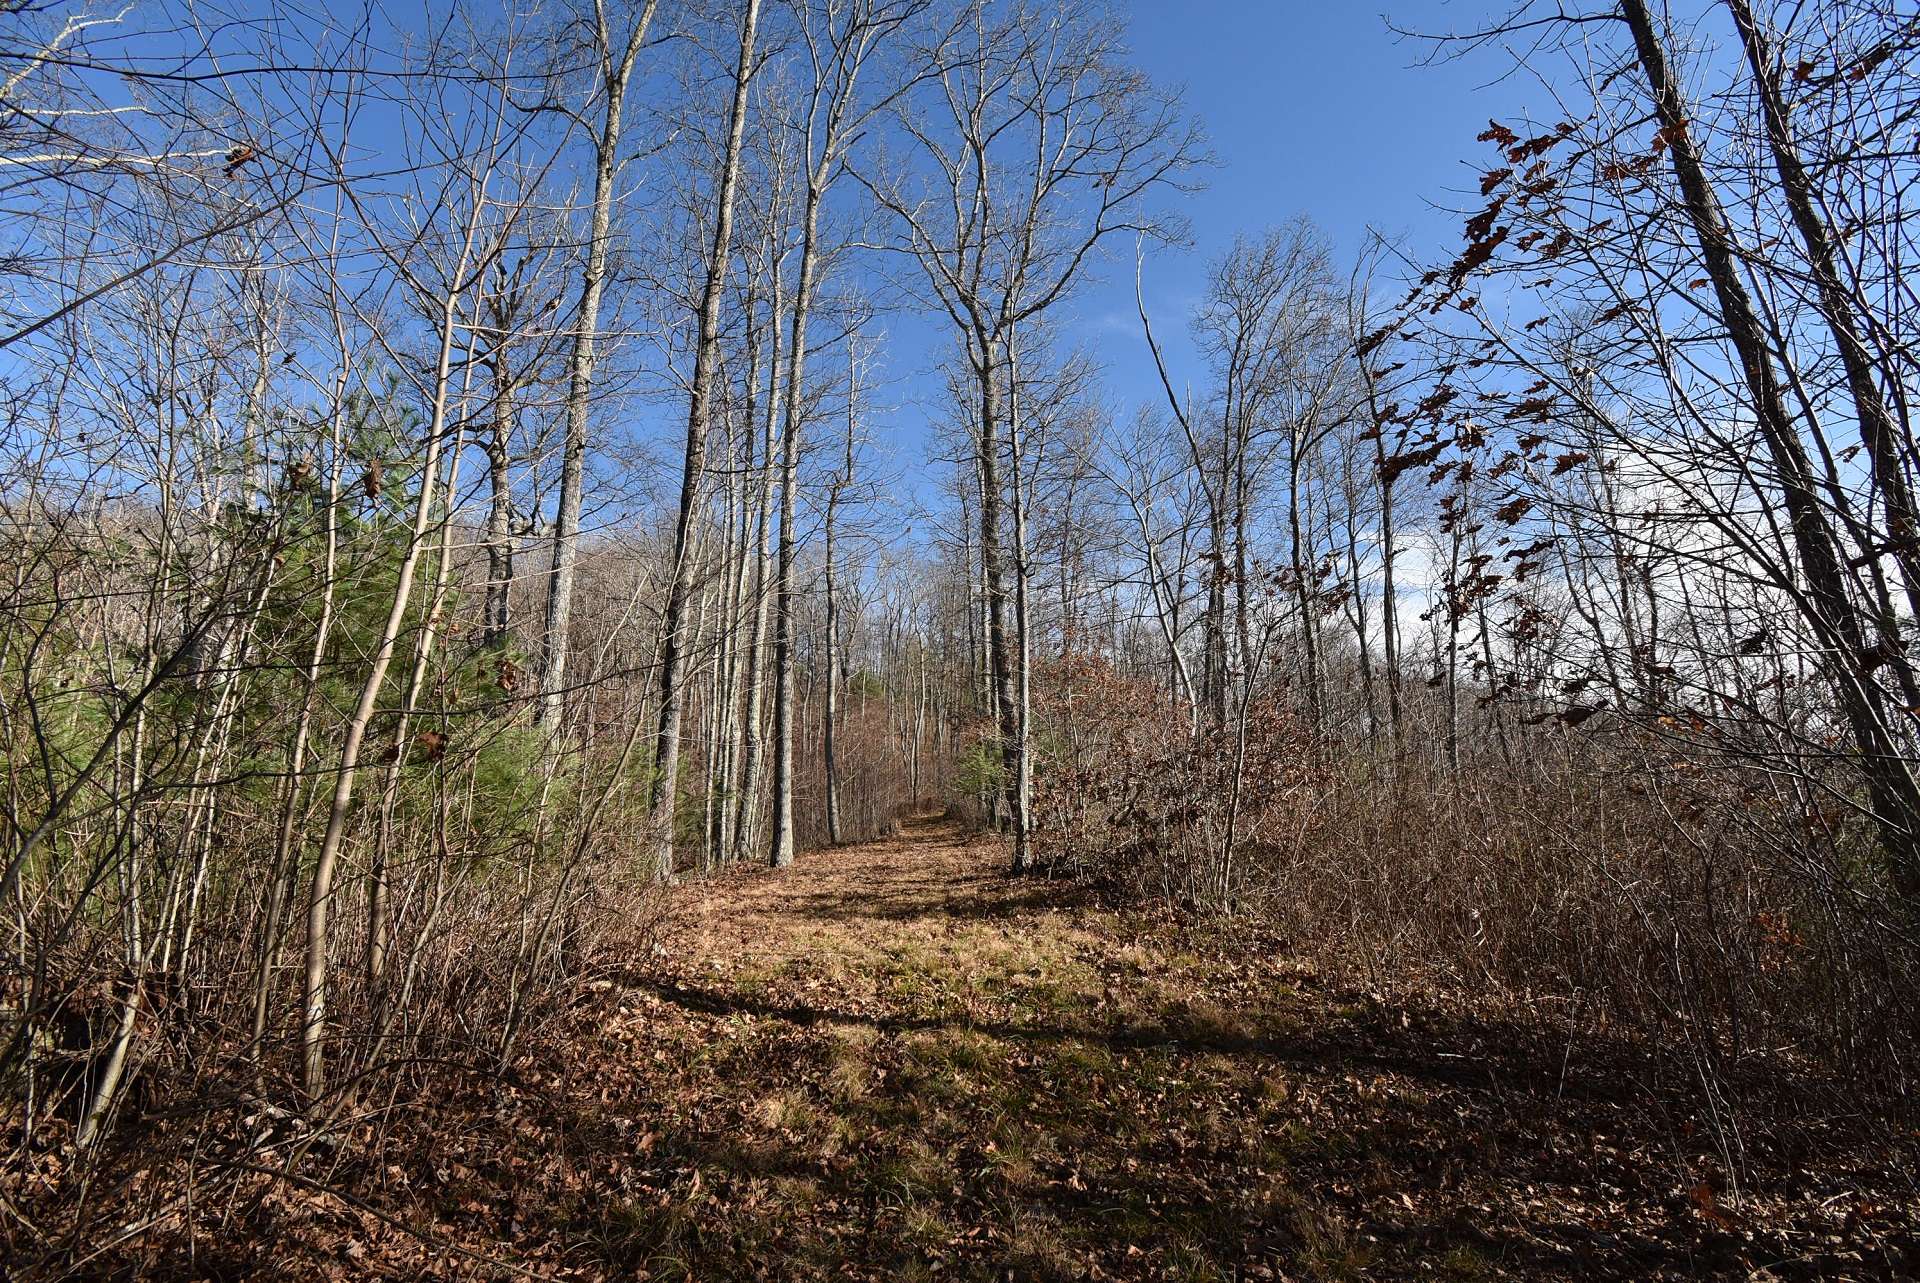 This tract is a hunter's paradise! Developers...take a look at the potential here for a one-of-a-kind mountain community within a short drive to all of the NC High Country destinations.